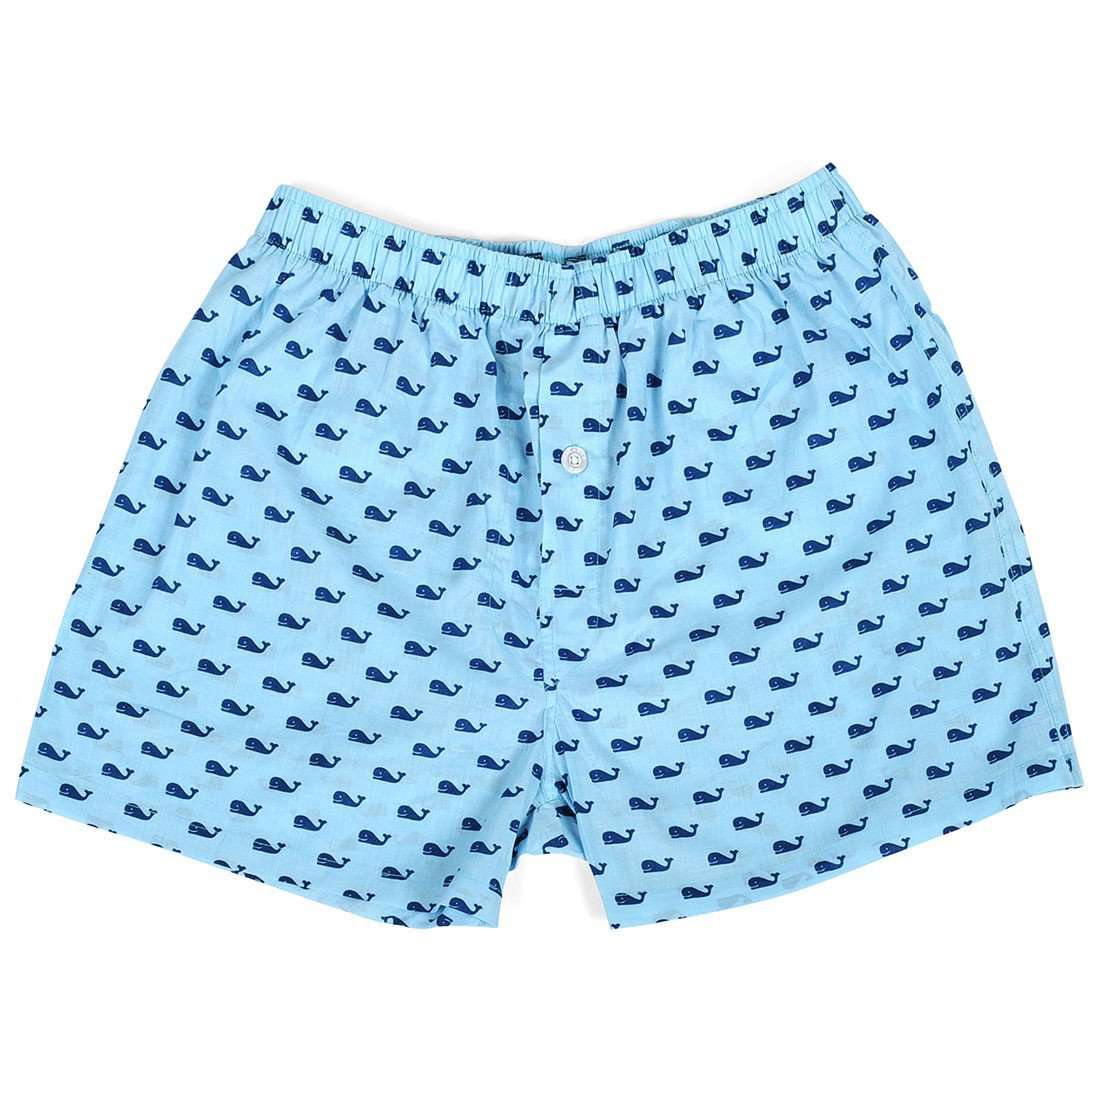 Men's Whale Boxers by Malabar Bay - Country Club Prep